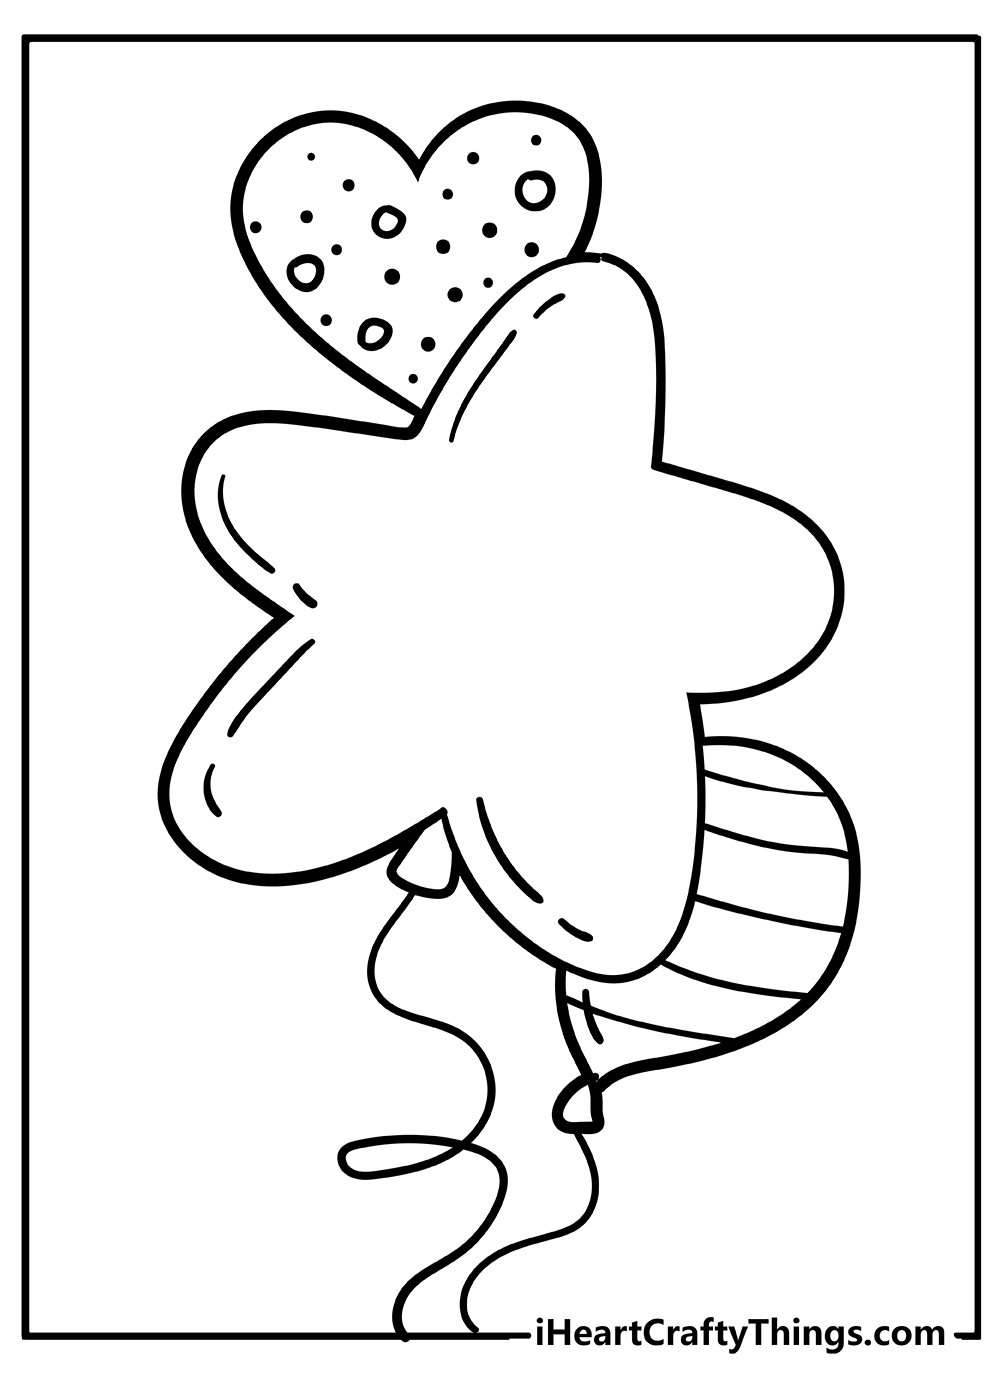 Balloons Coloring Book for adults free download